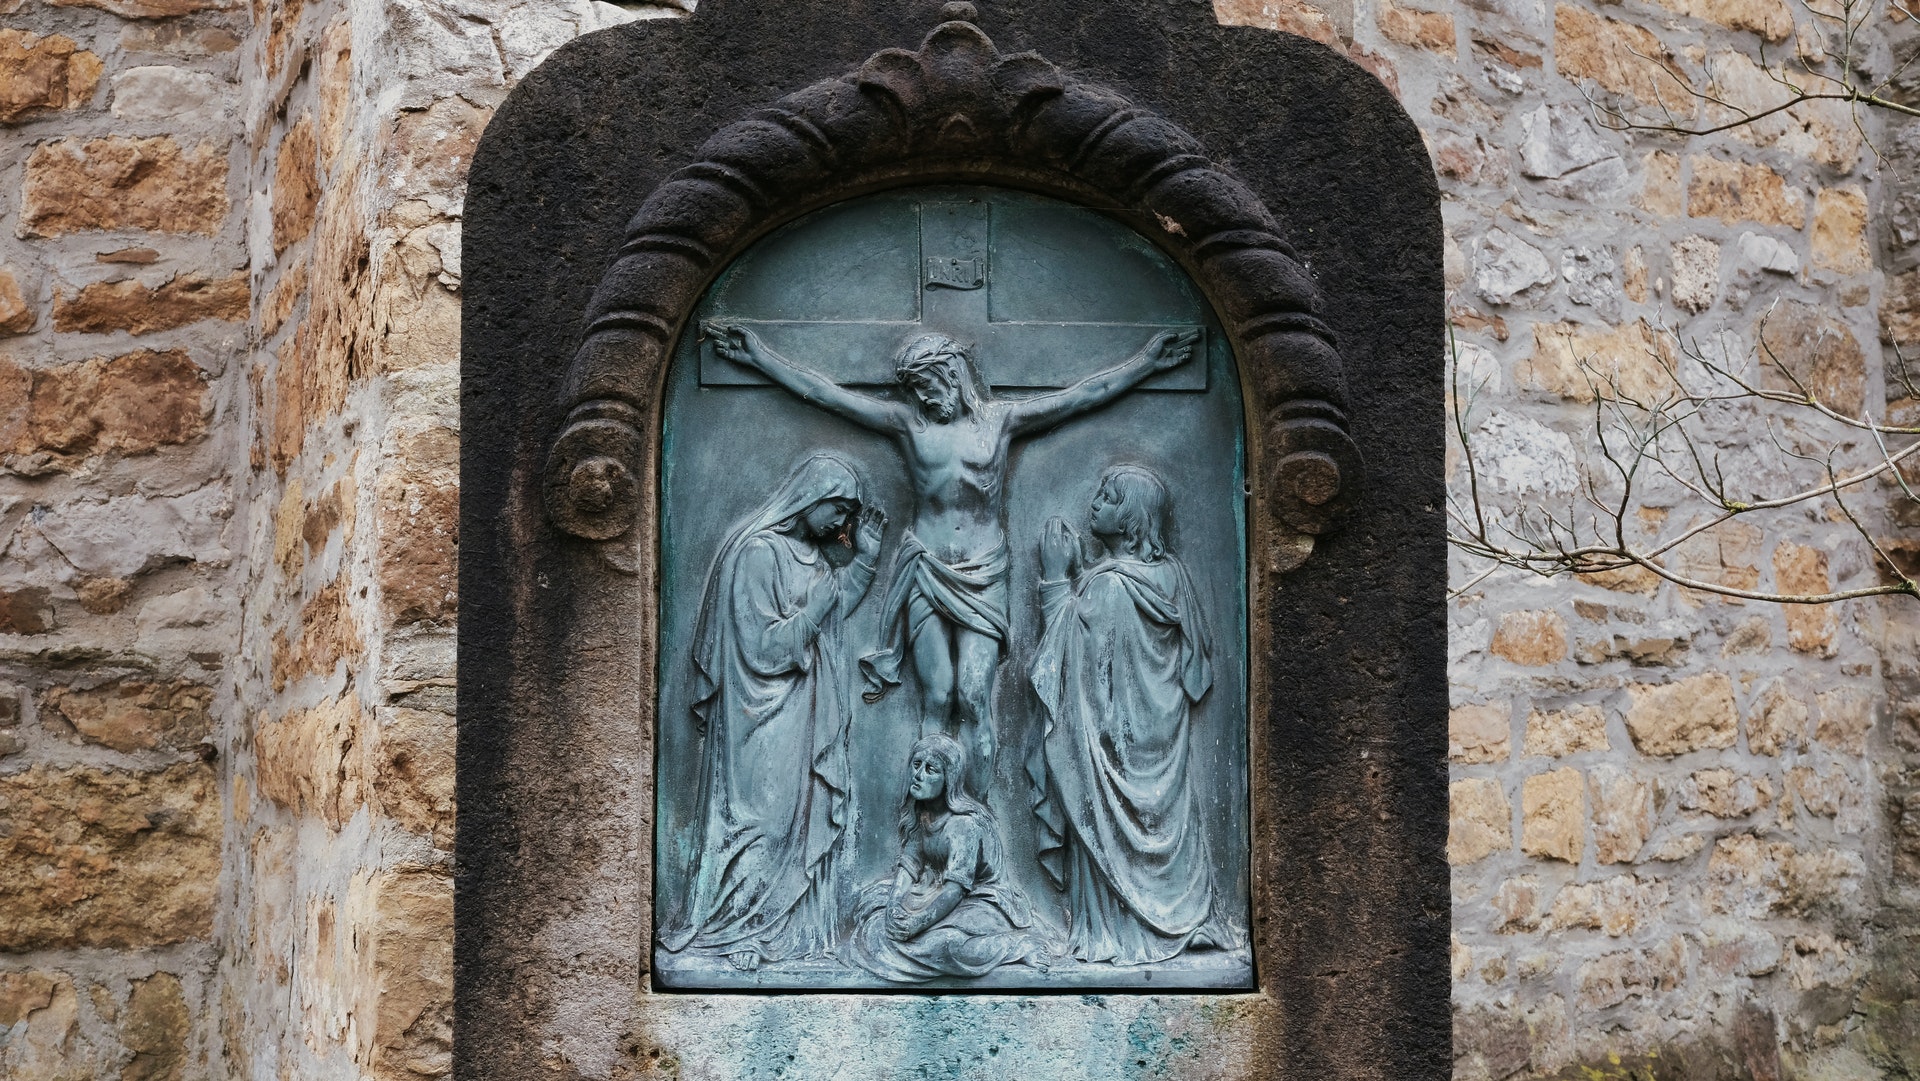 A closeup of sculpted imagery of Jesus Christ on the Cross